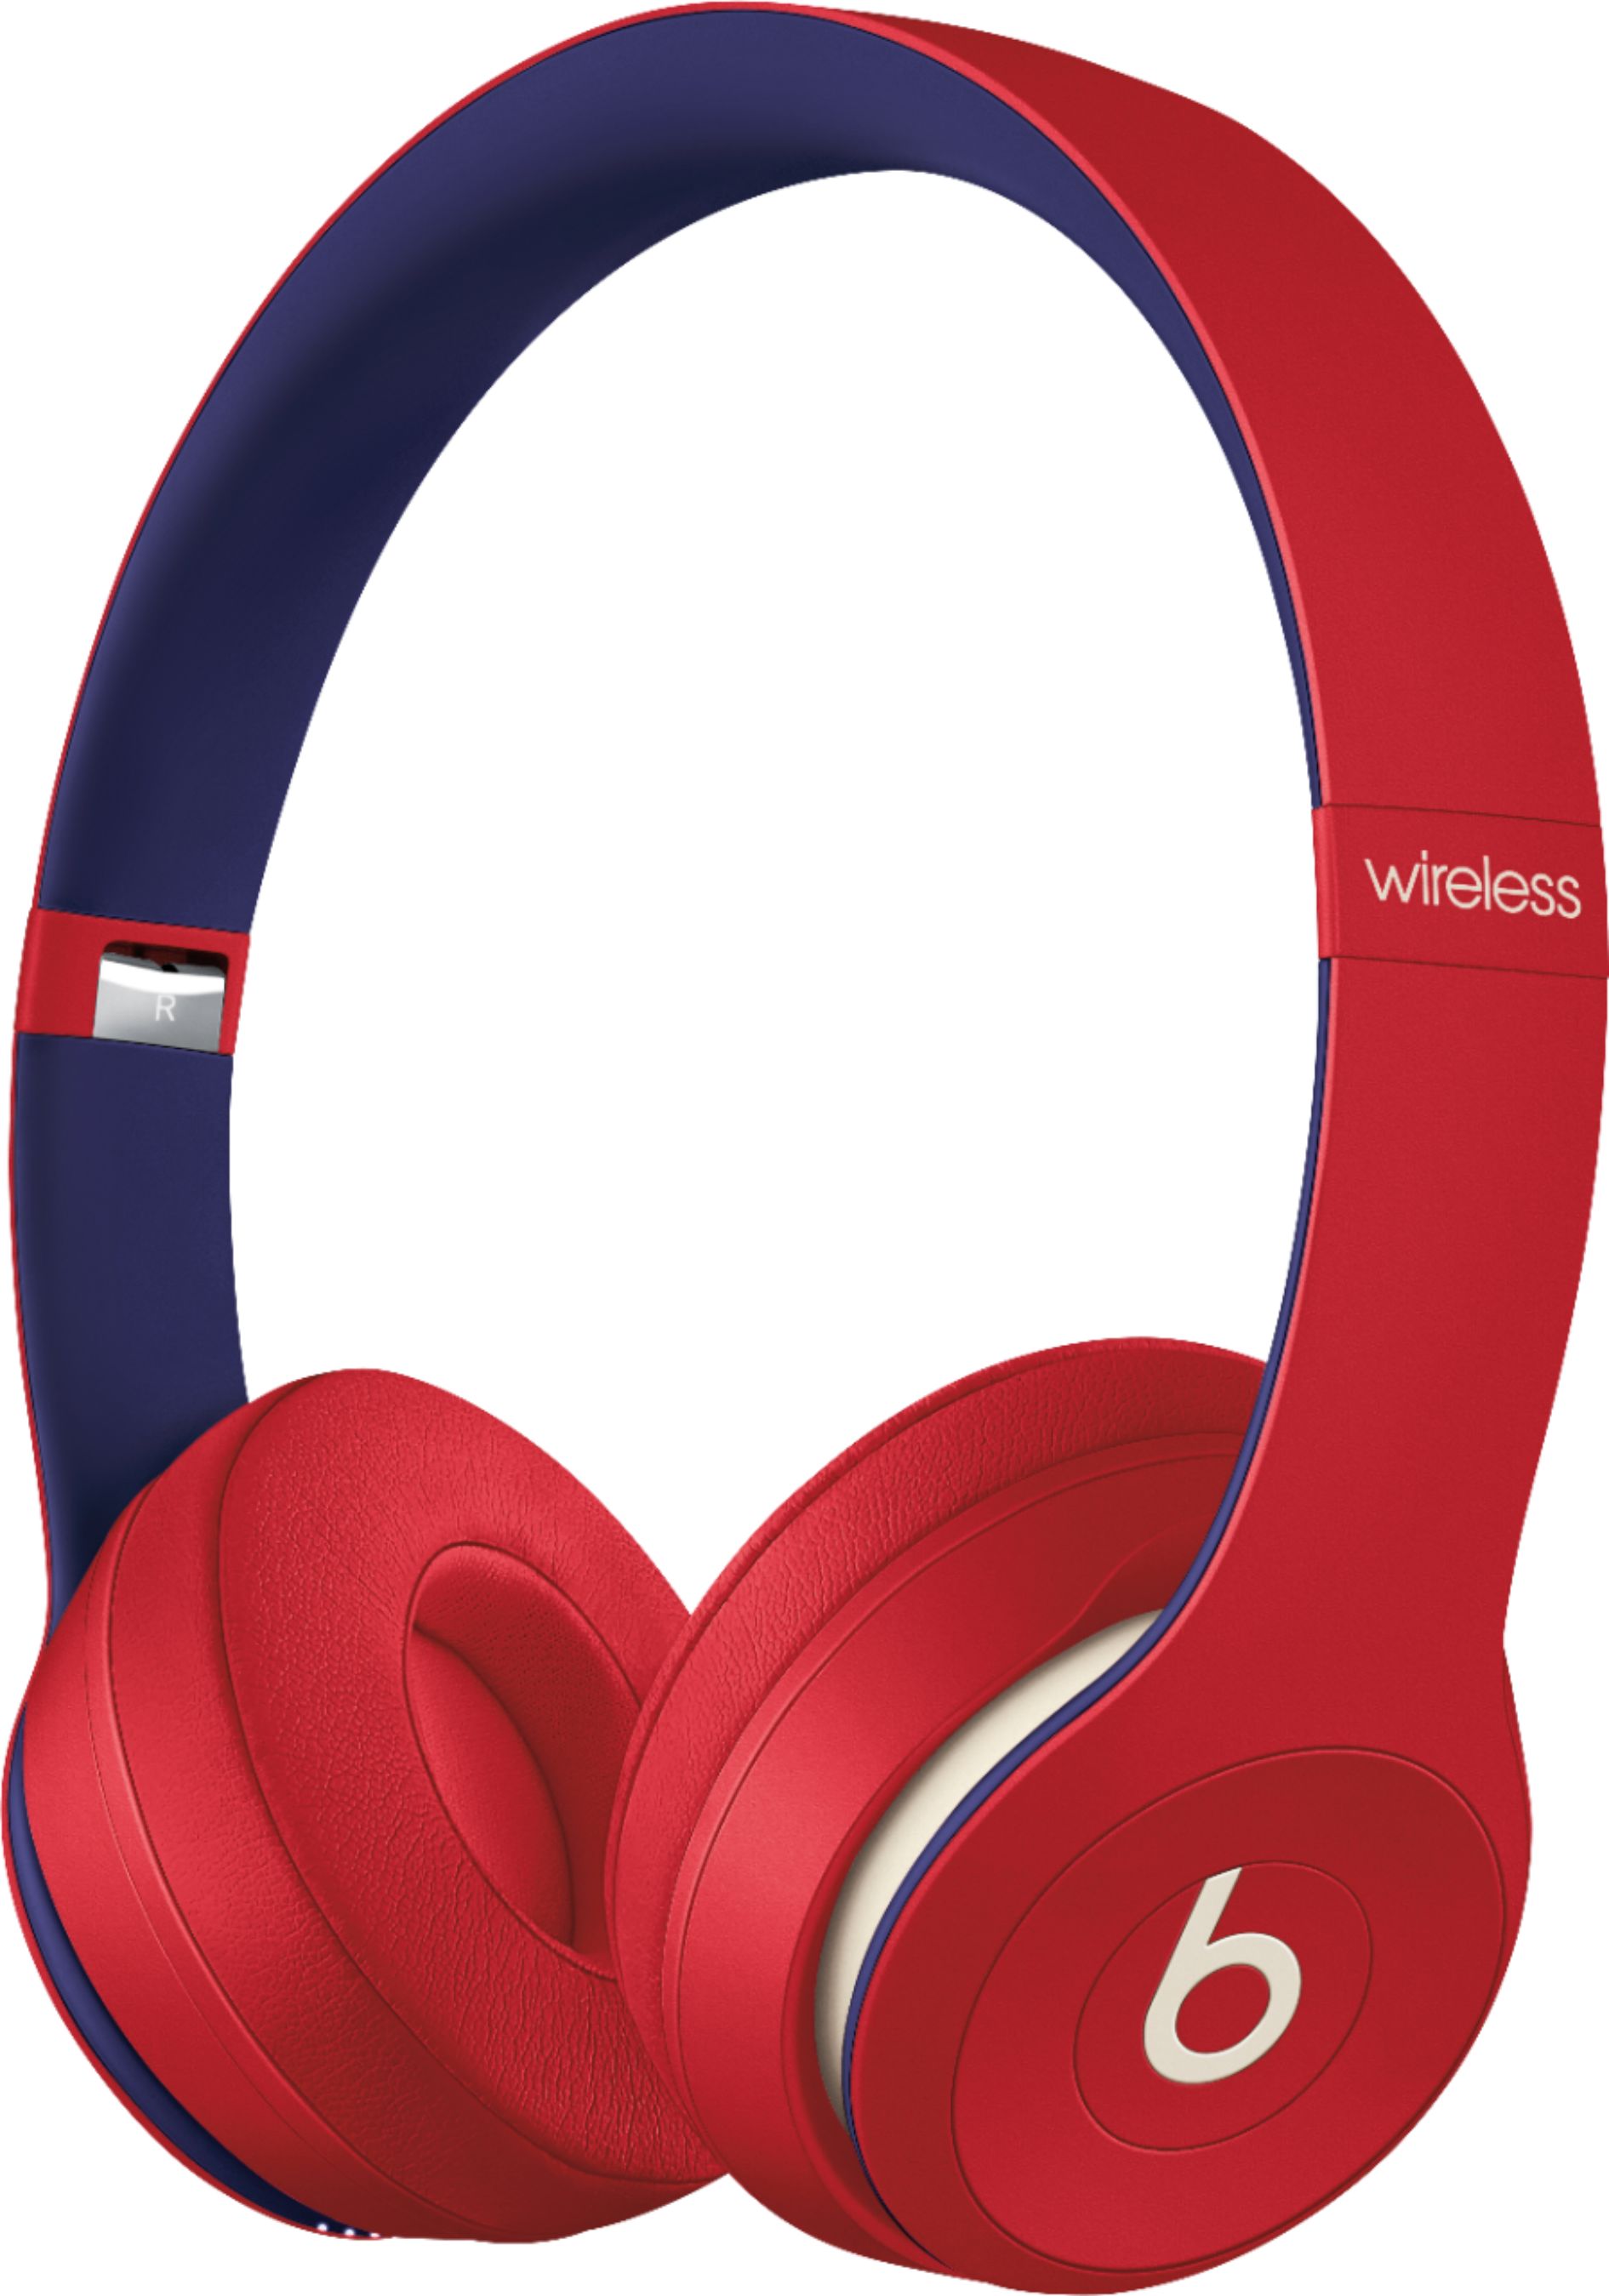 Beats By Dr Dre Solo Beats Club Collection Wireless On Ear Headphones Club Red Mv8t2ll A Best Buy